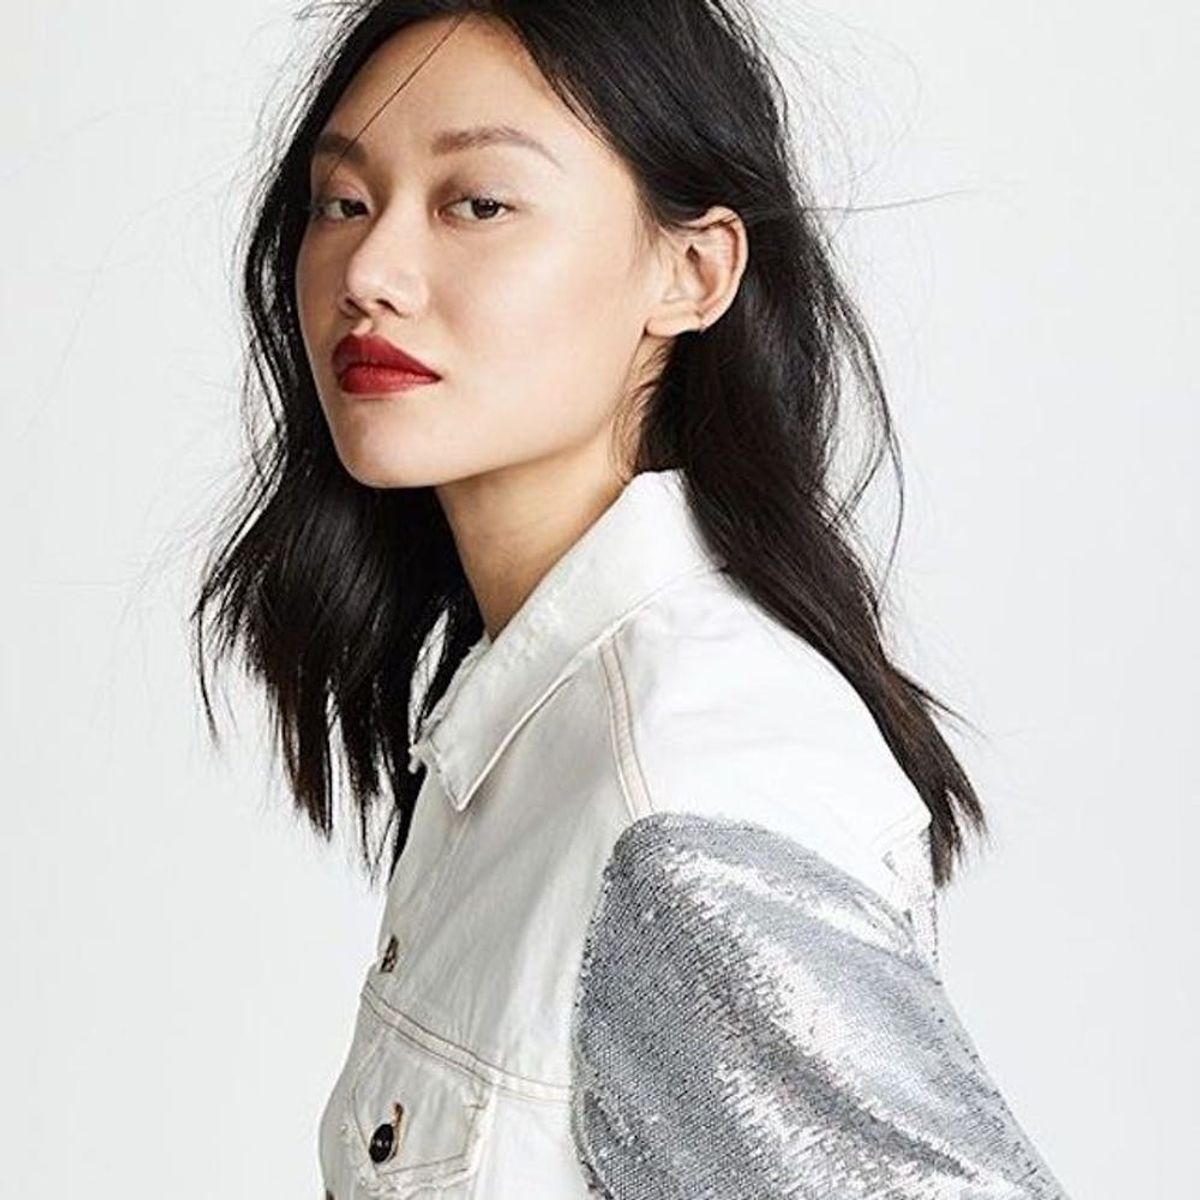 17 Not-So-Basic Denim Jackets for Warm Weather Nights Out